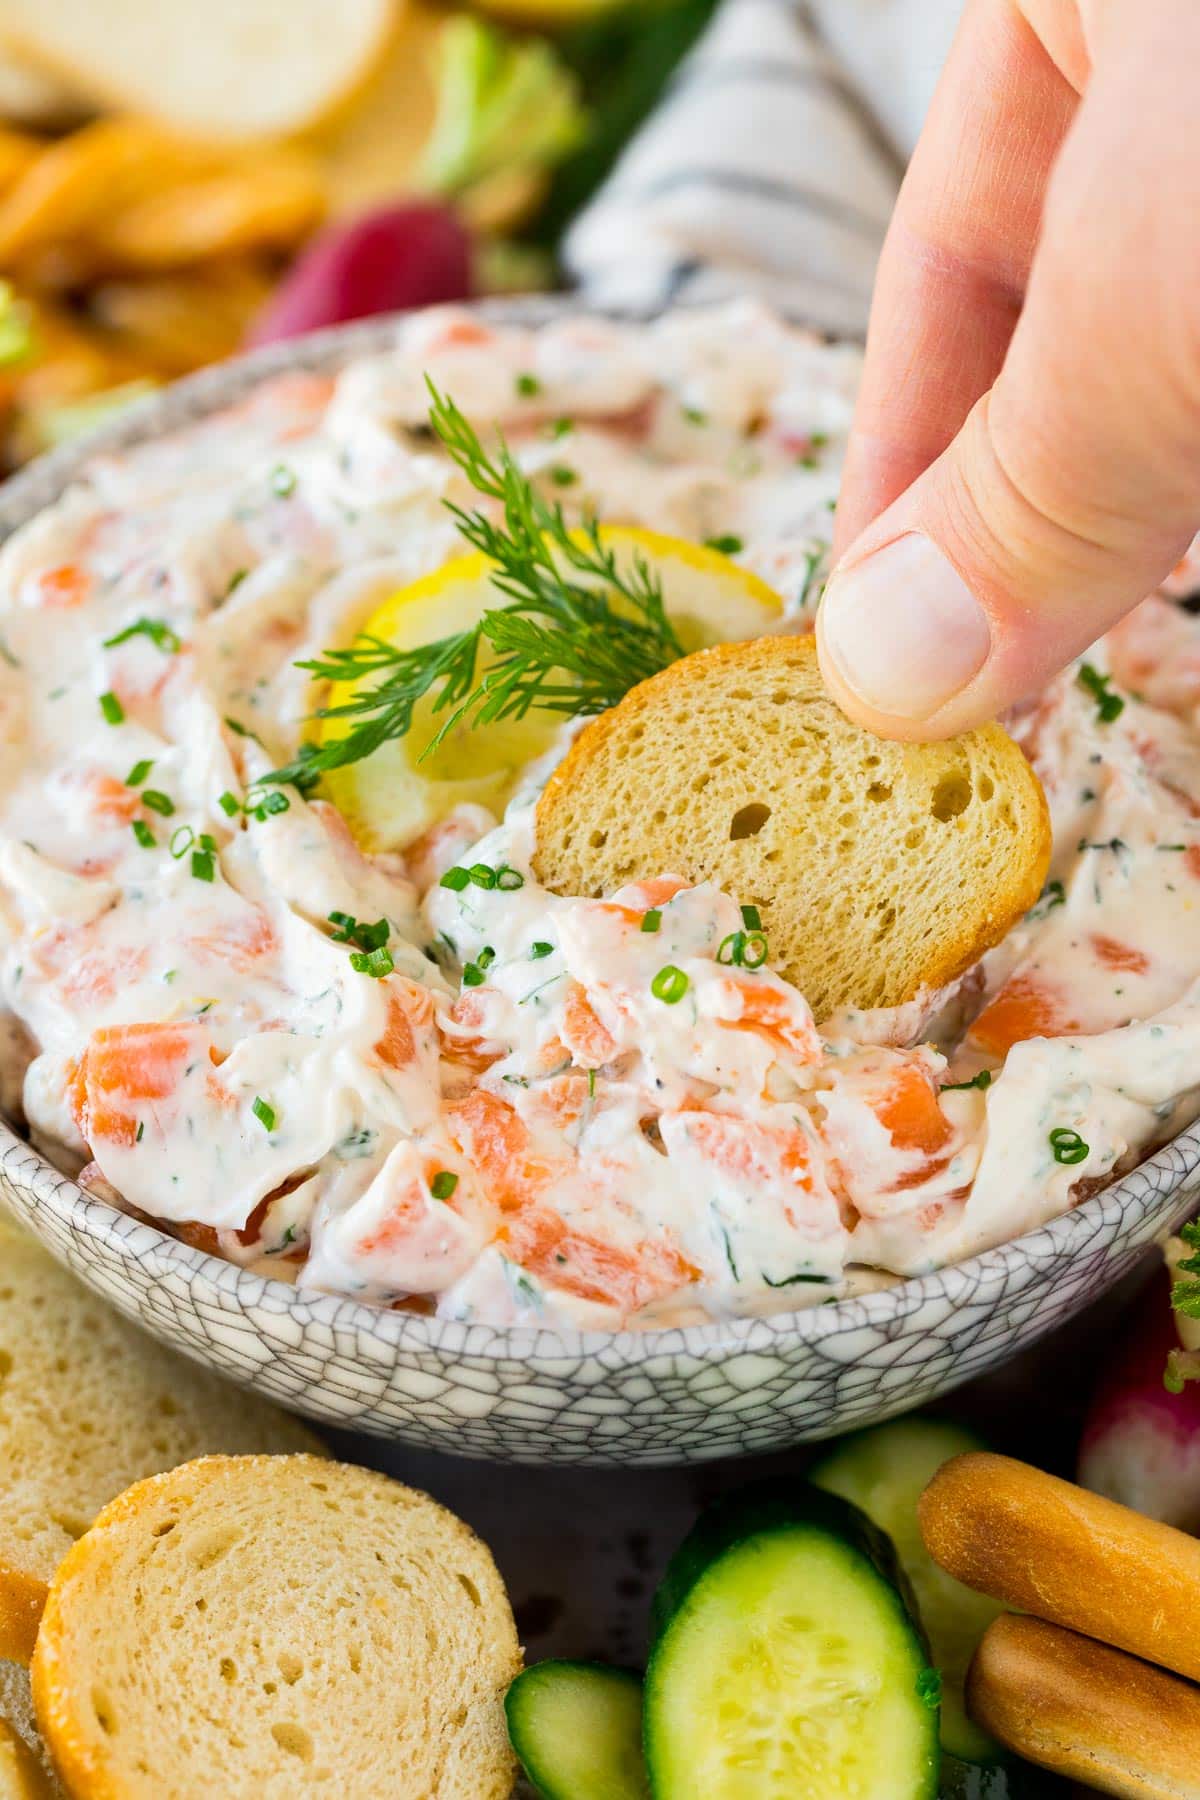 A hand scooping up a portion of smoked salmon dip on a crostini.